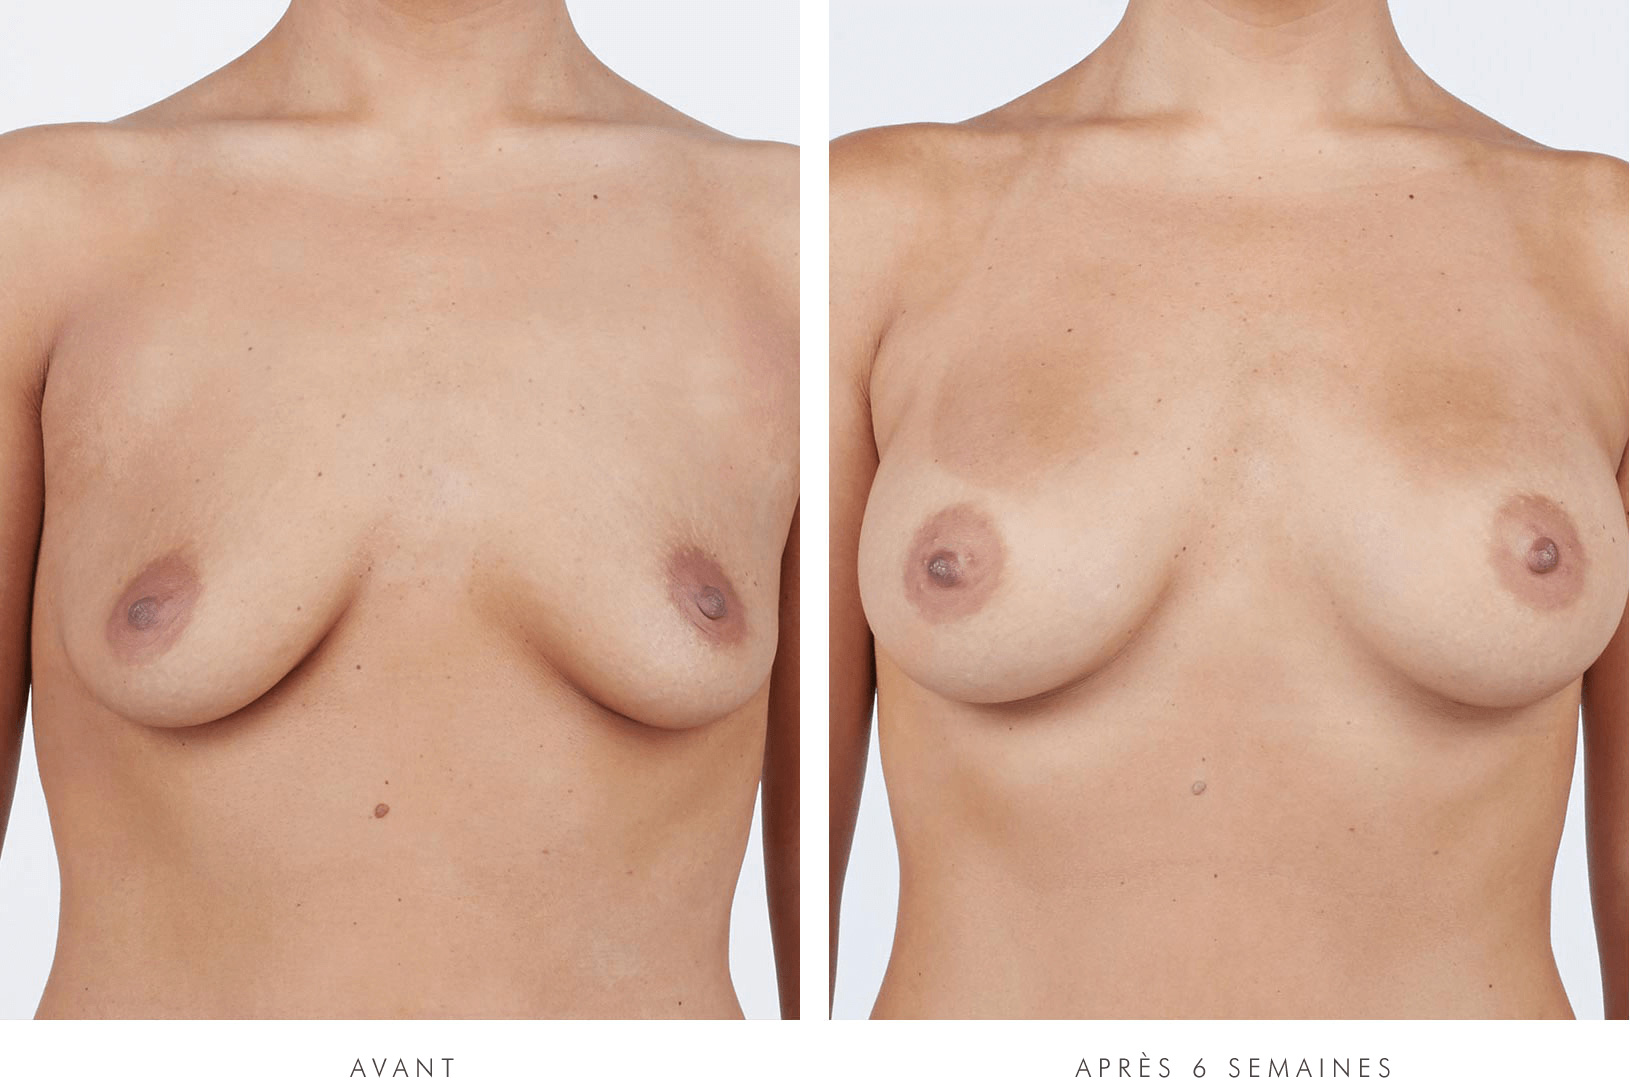 Melissa, VUE DE FACE, before breast augmentation / Melissa, VUE DE FACE, 6 weeks after breast augmentation with NATRELLE® INSPIRA® Style SRM-310 breast implants